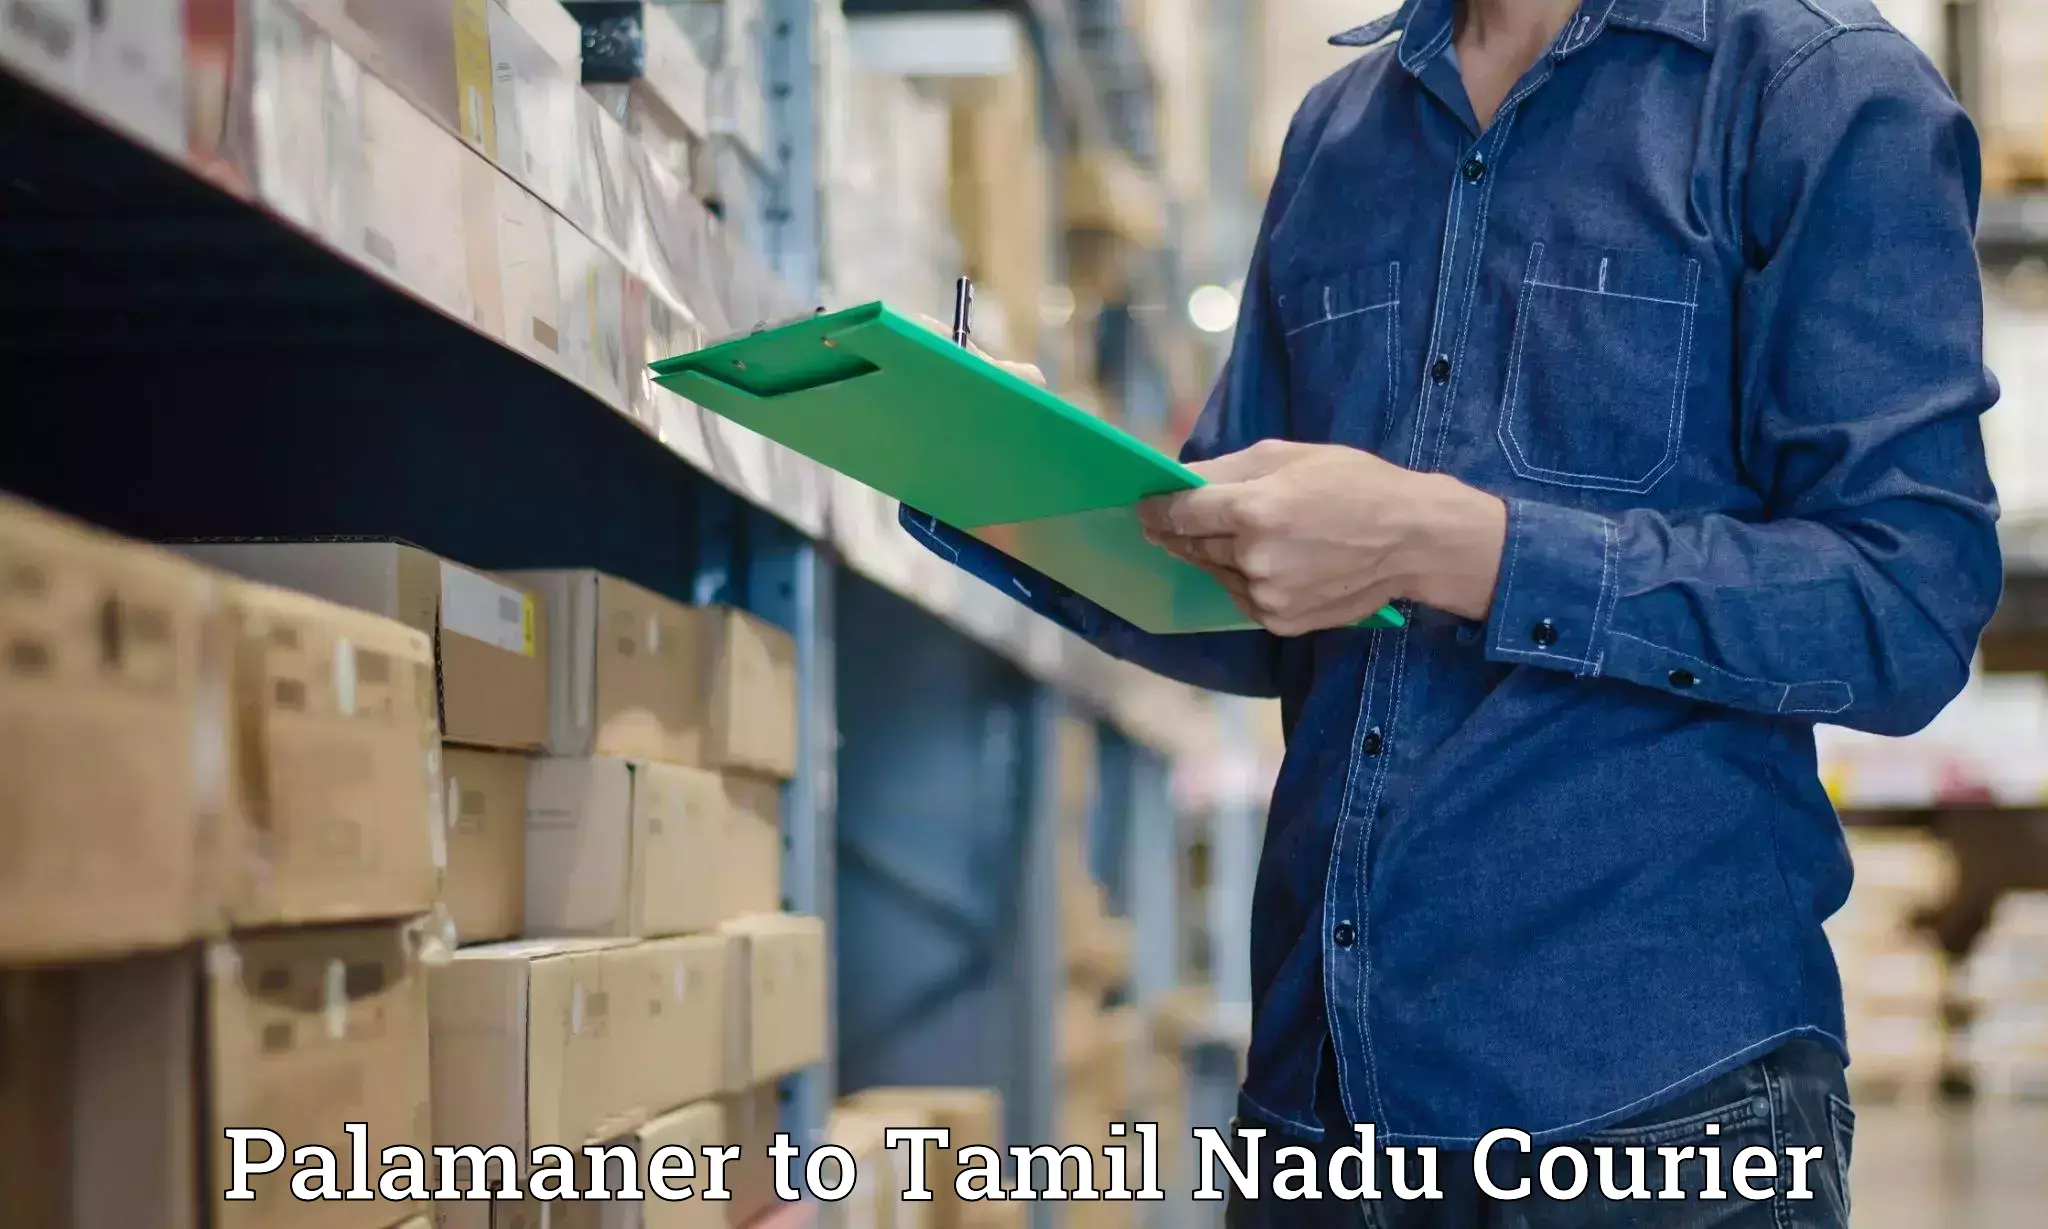 Courier service comparison in Palamaner to Saveetha Institute of Medical and Technical Sciences Chennai